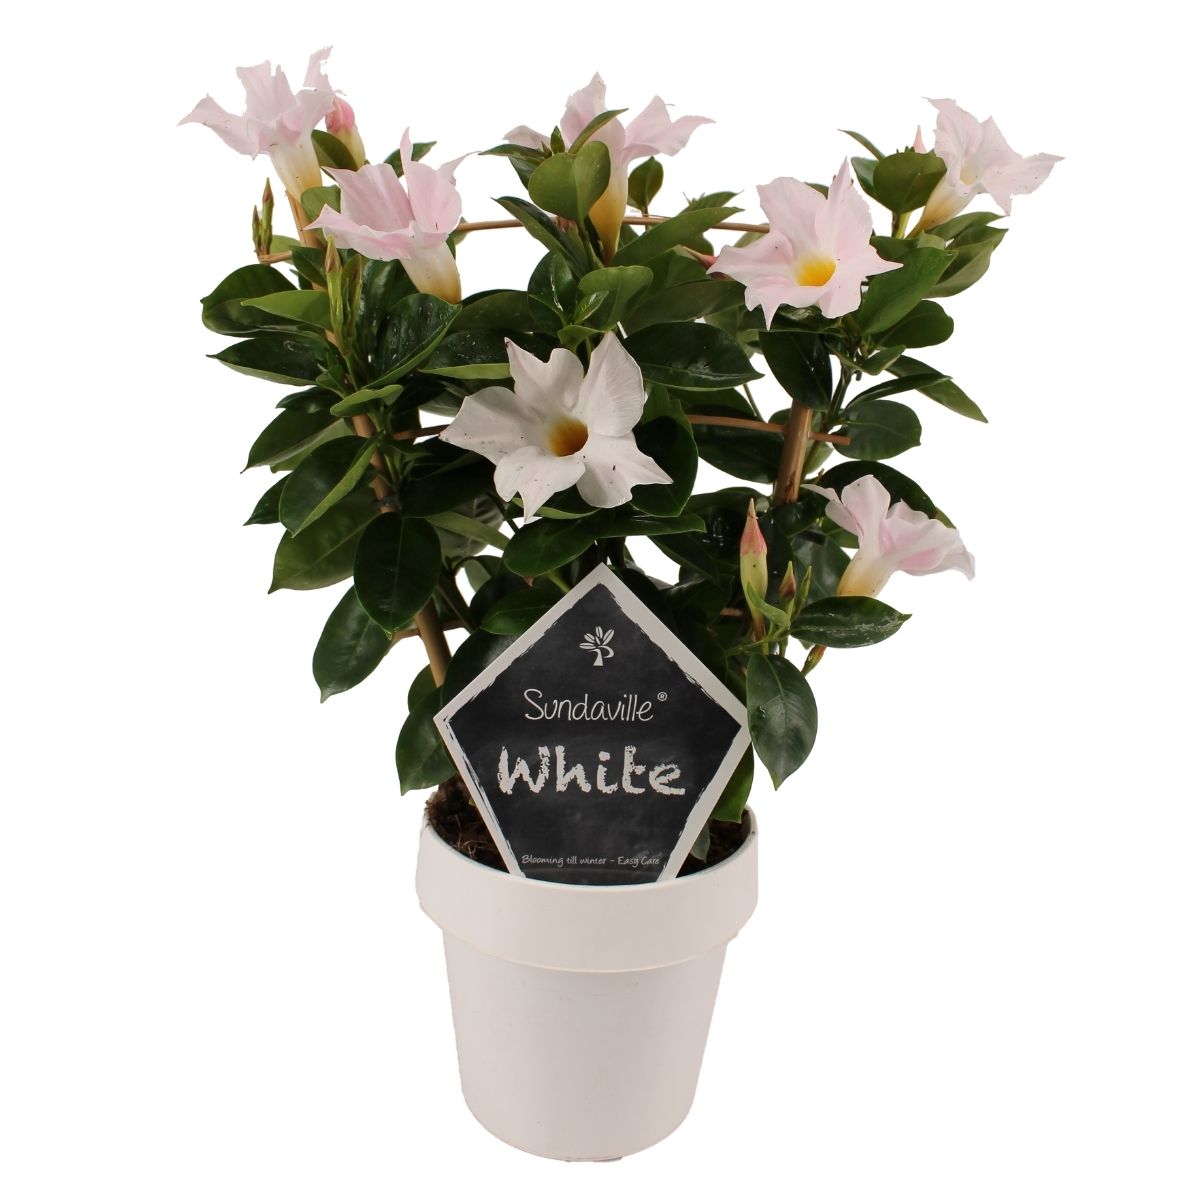 Mandevilla white petals, white flower pot, green leaves and tag with text